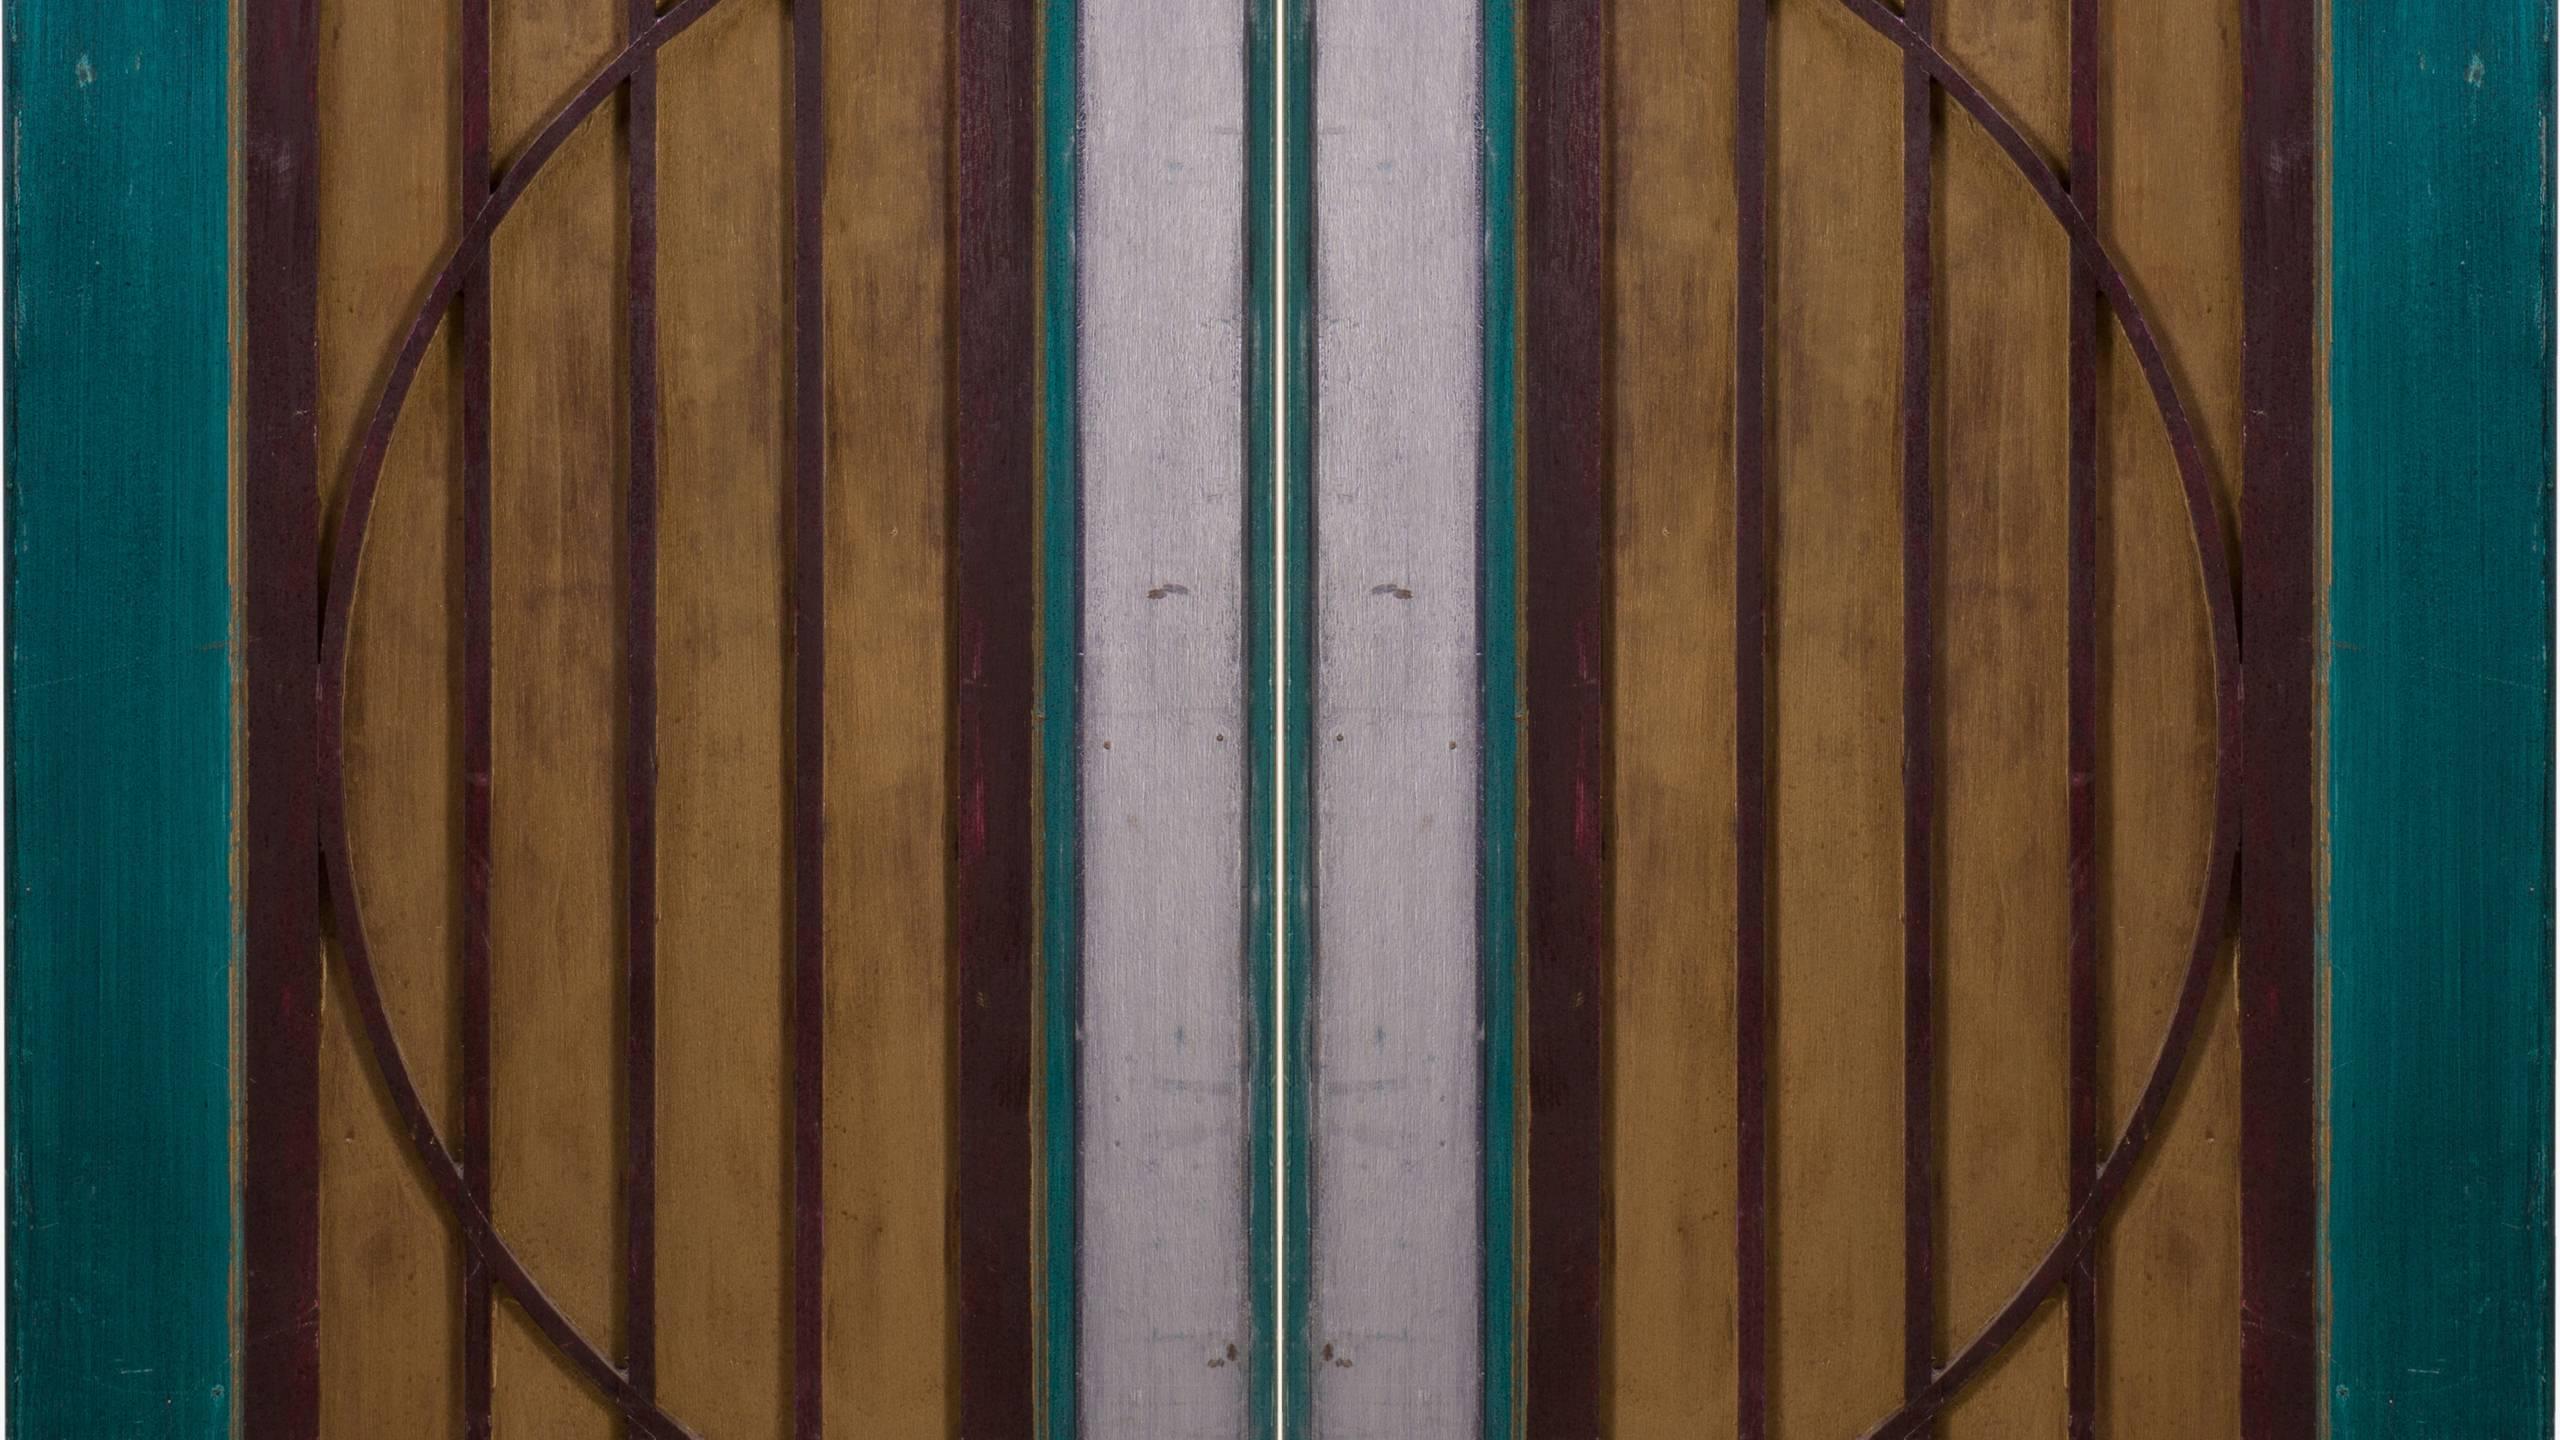 A pair of decorative Art-Deco inspired wood doors from Goodspeed Opera House in East Haddam, Connecticut. Most likely used on the stage set or as an architectural element, they delightfully embody the spirit of Art-Deco Design. These would be great